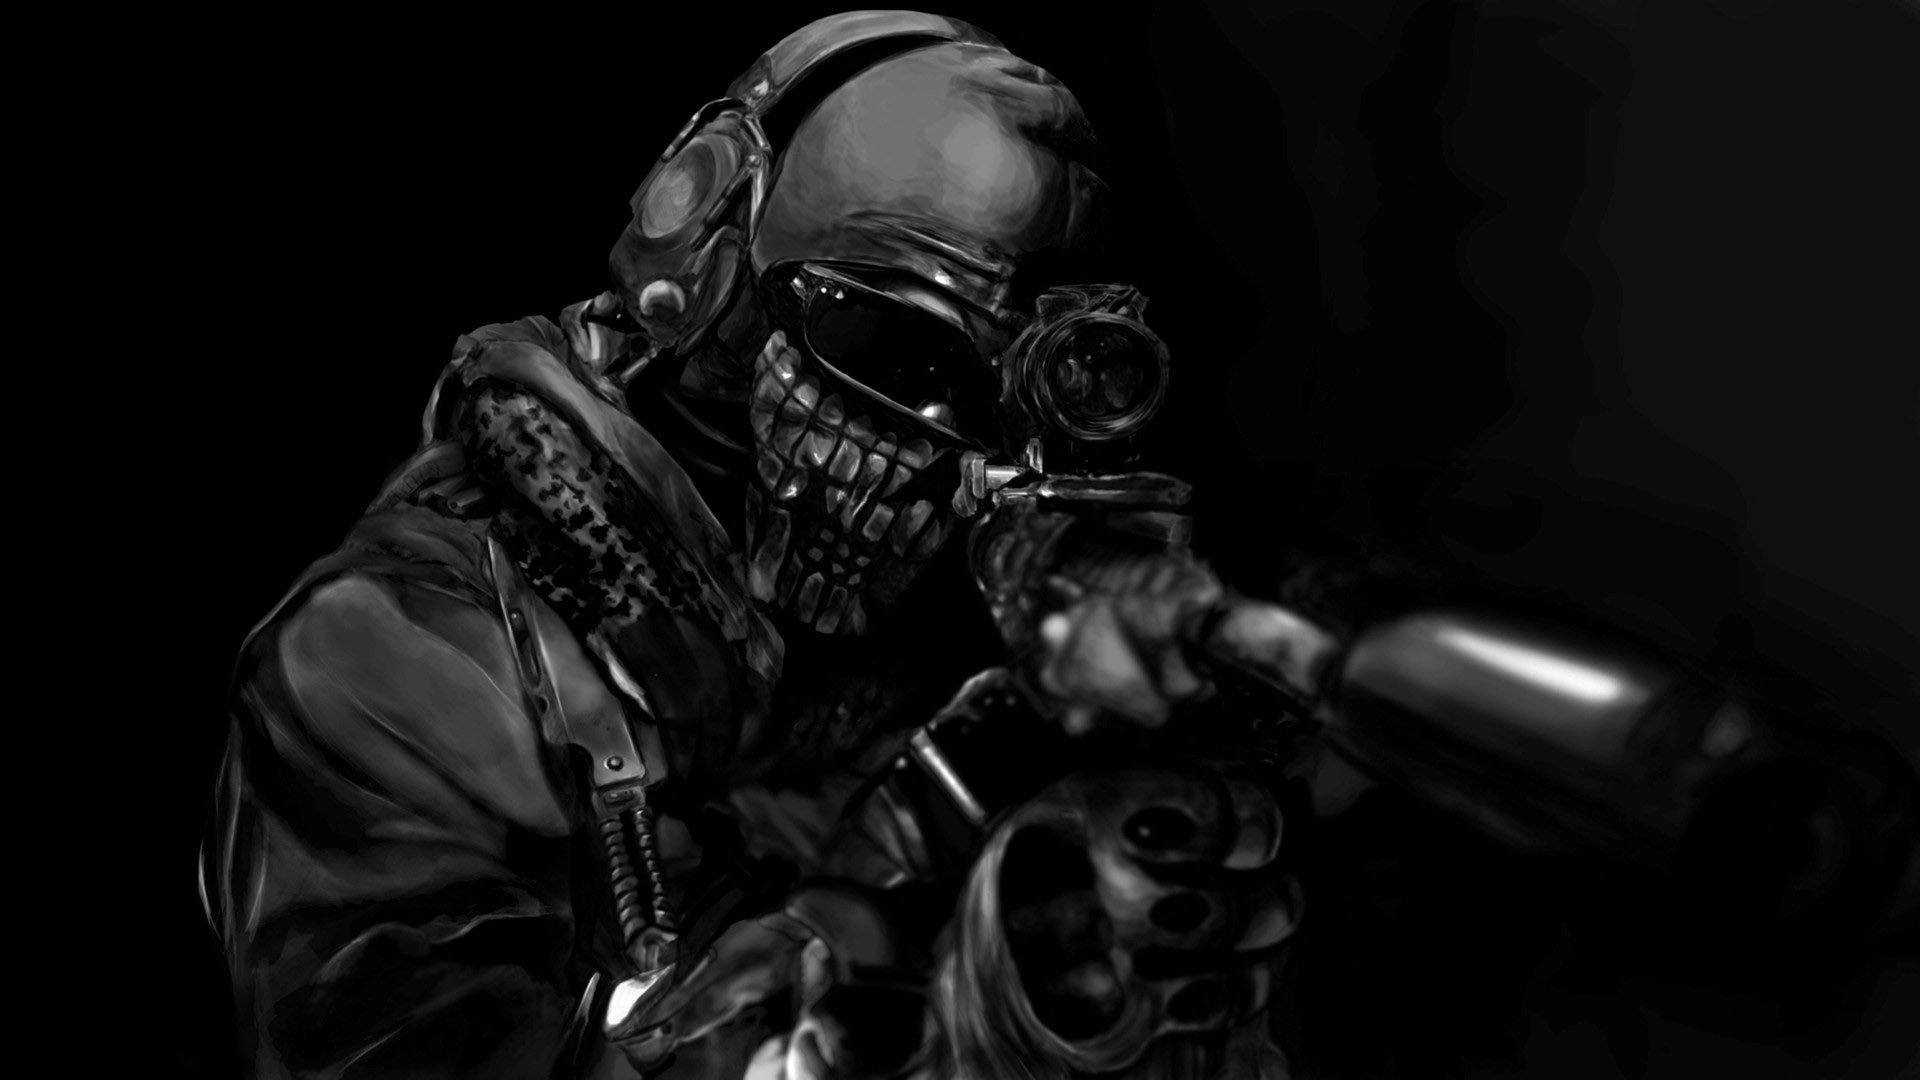 Call of Duty Wallpapers HD 